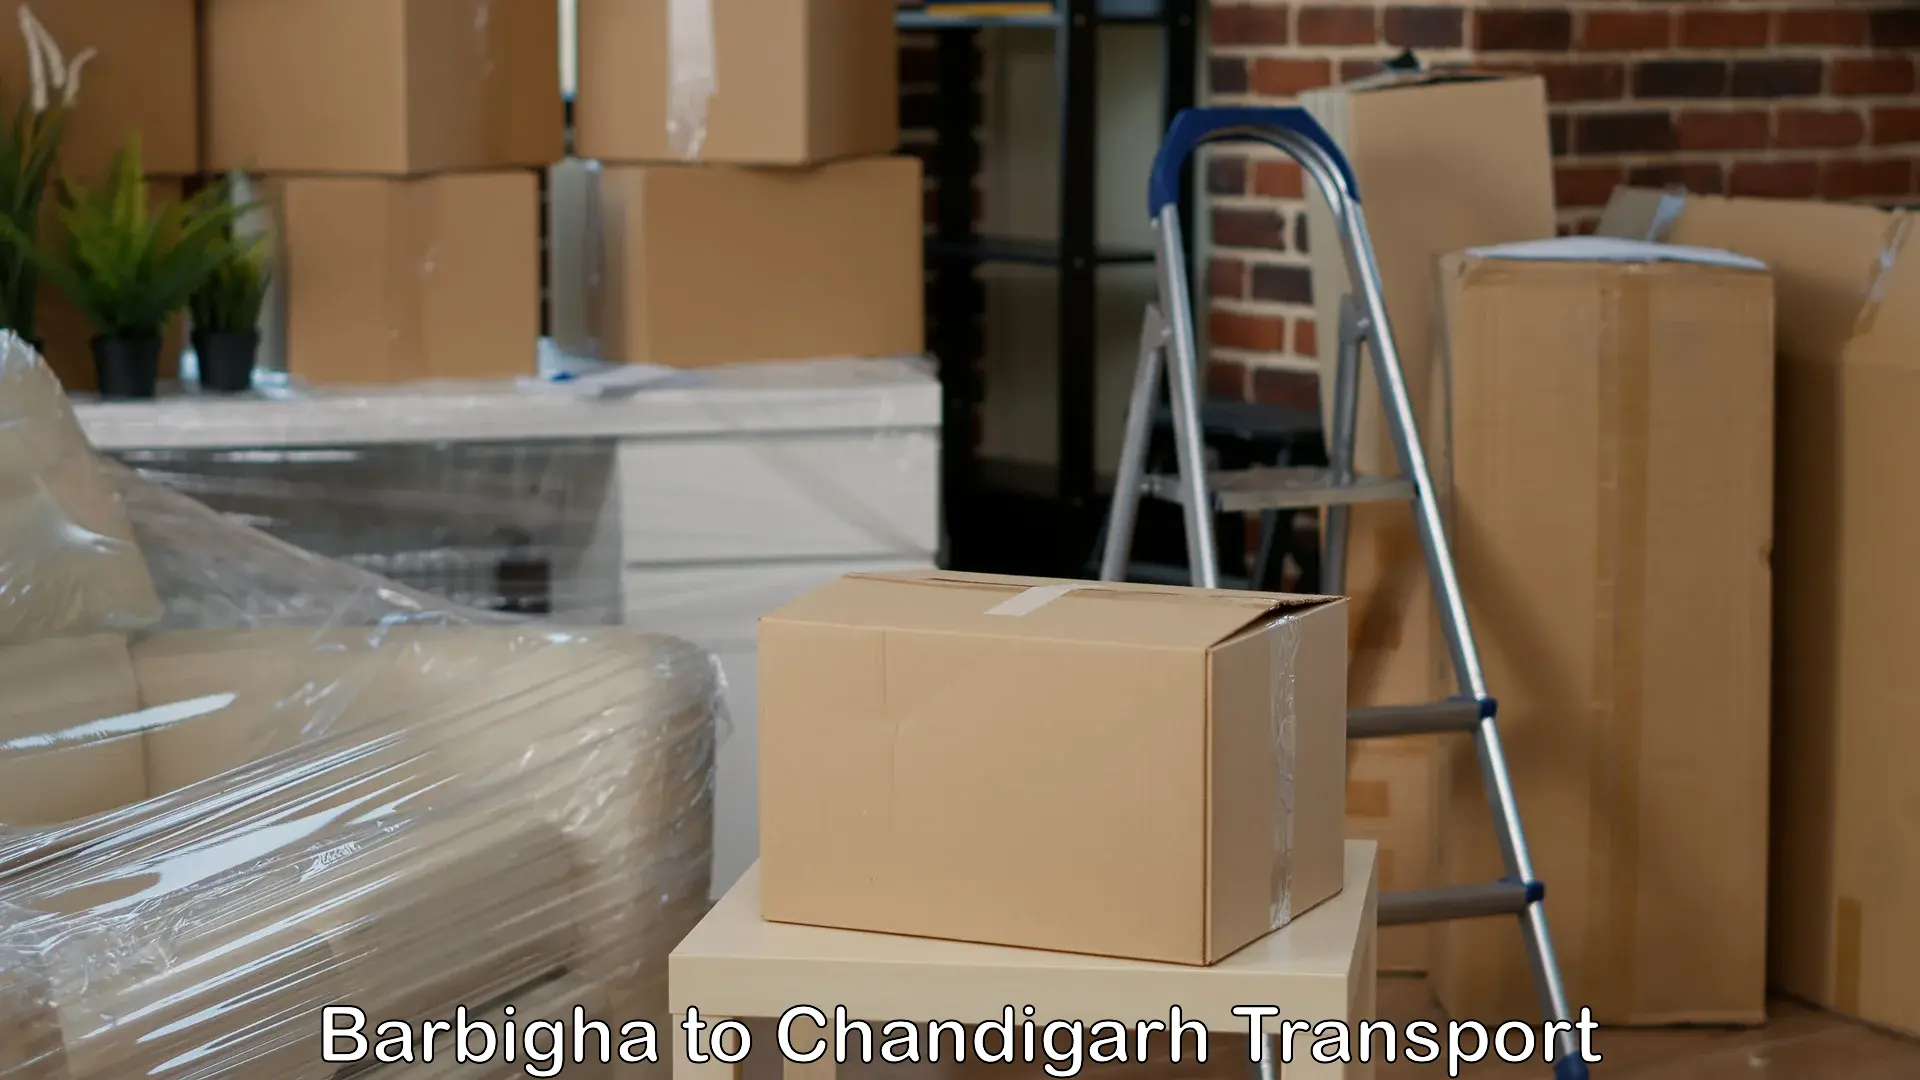 Lorry transport service in Barbigha to Chandigarh